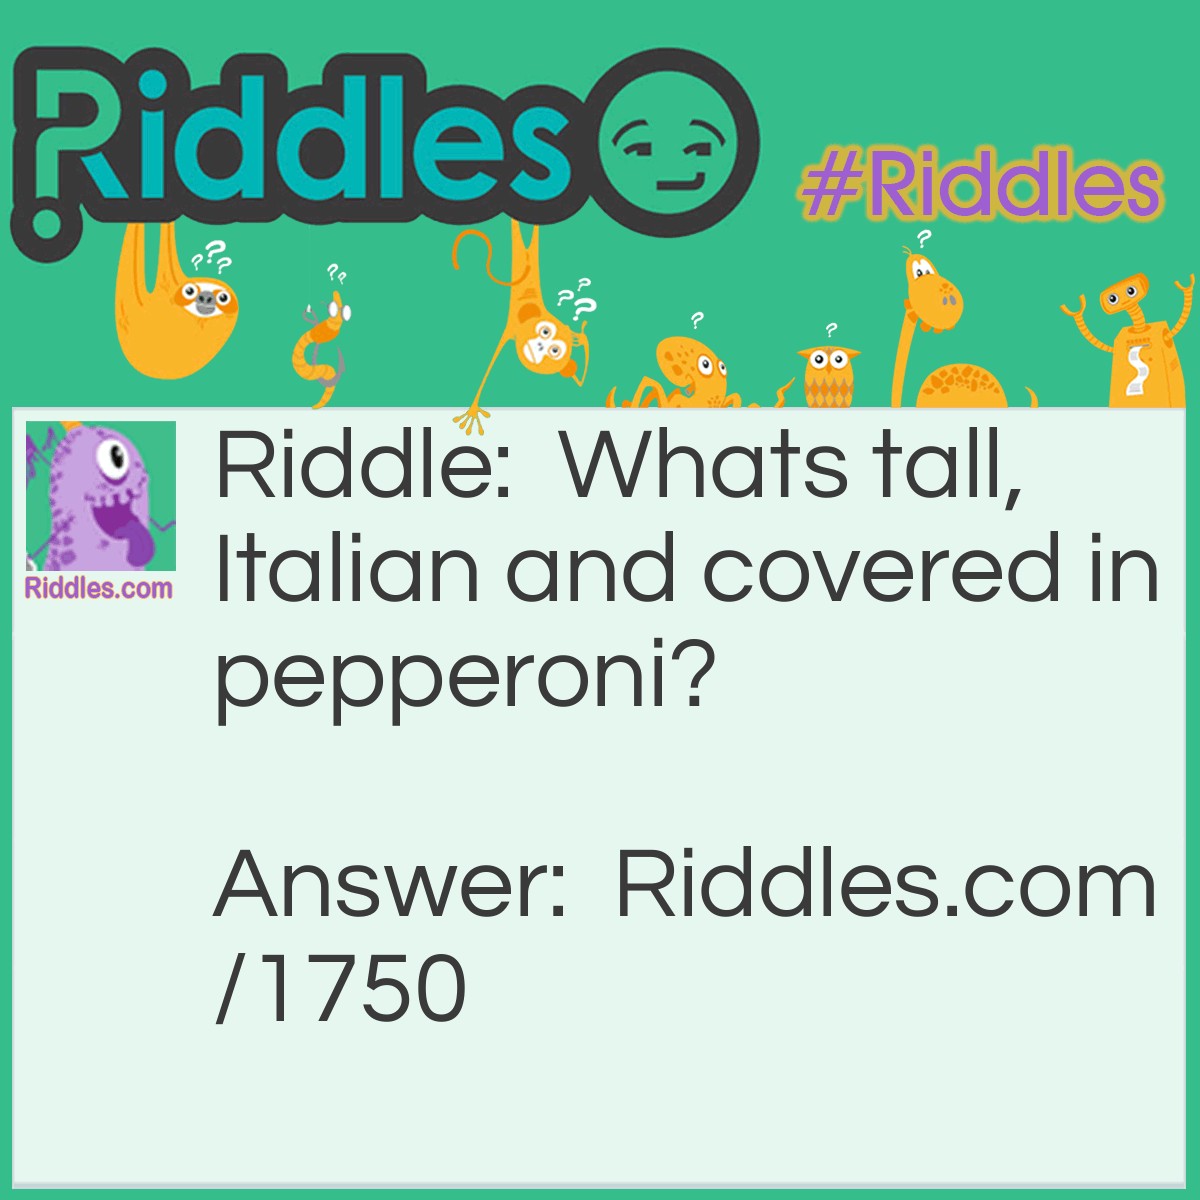 Riddle: What's tall, Italian, and covered in pepperoni? Answer: The leaning tower of Pizza.